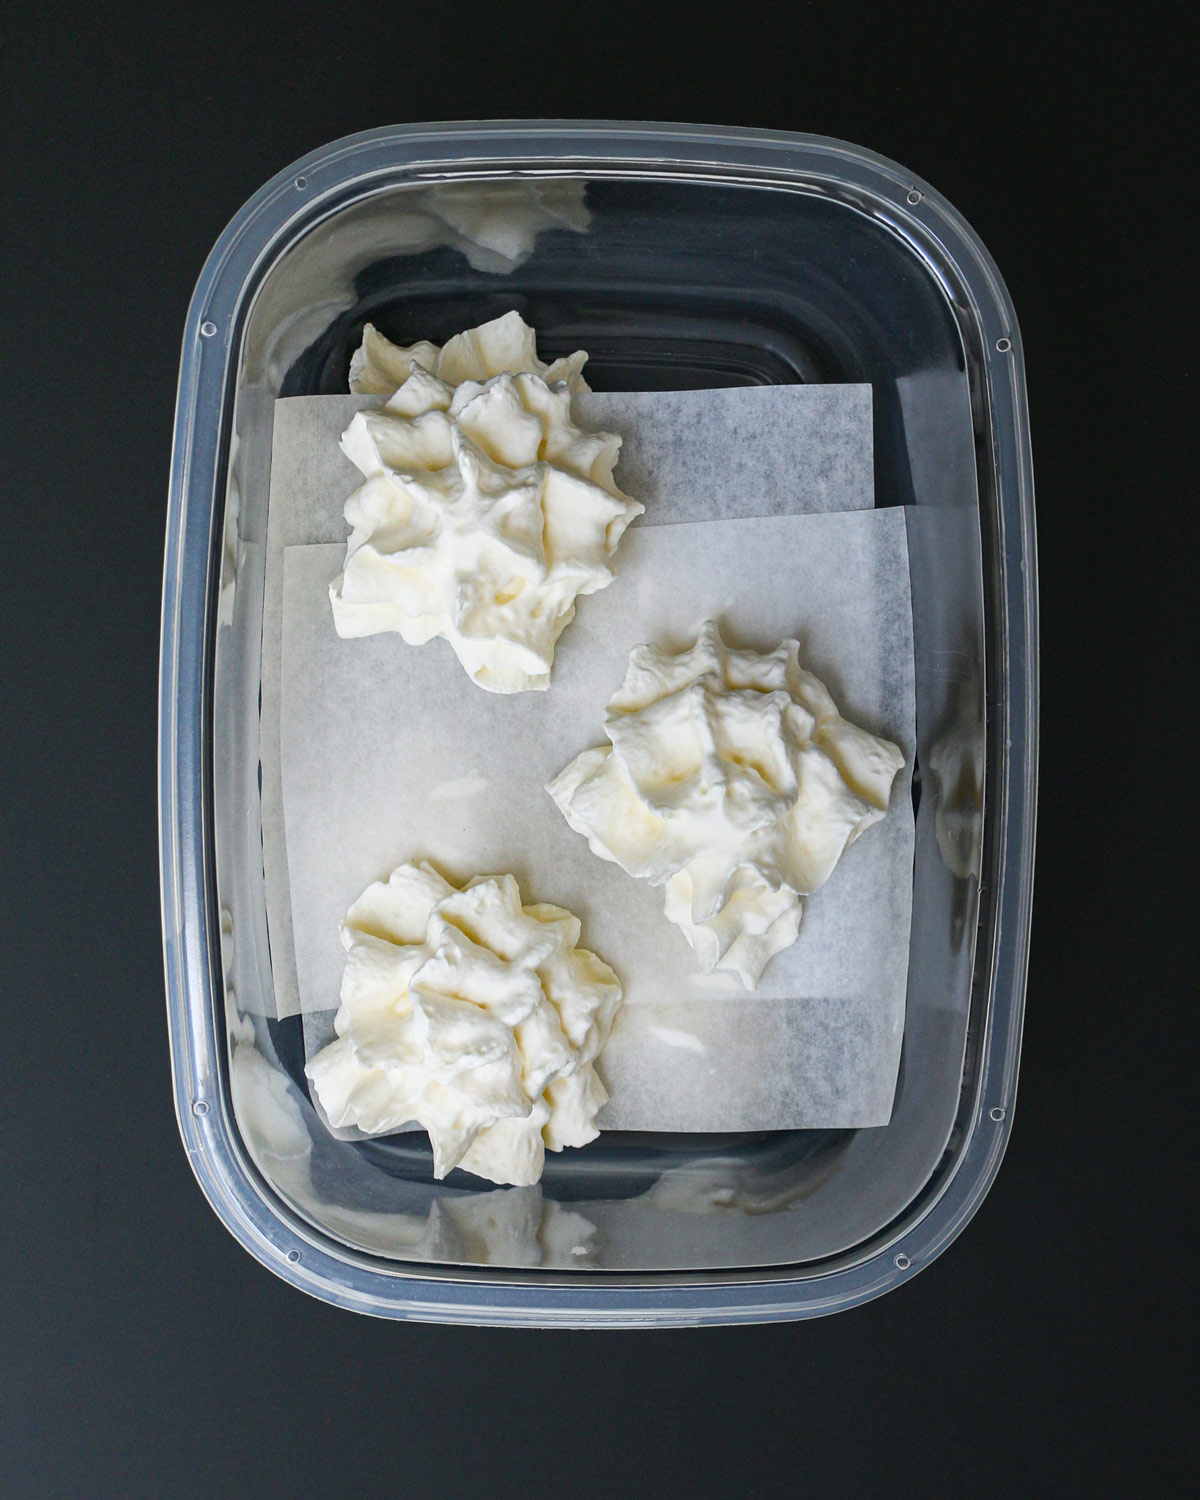 frozen dollops removed from the tray and layered in a plastic container between sheets of parchment.